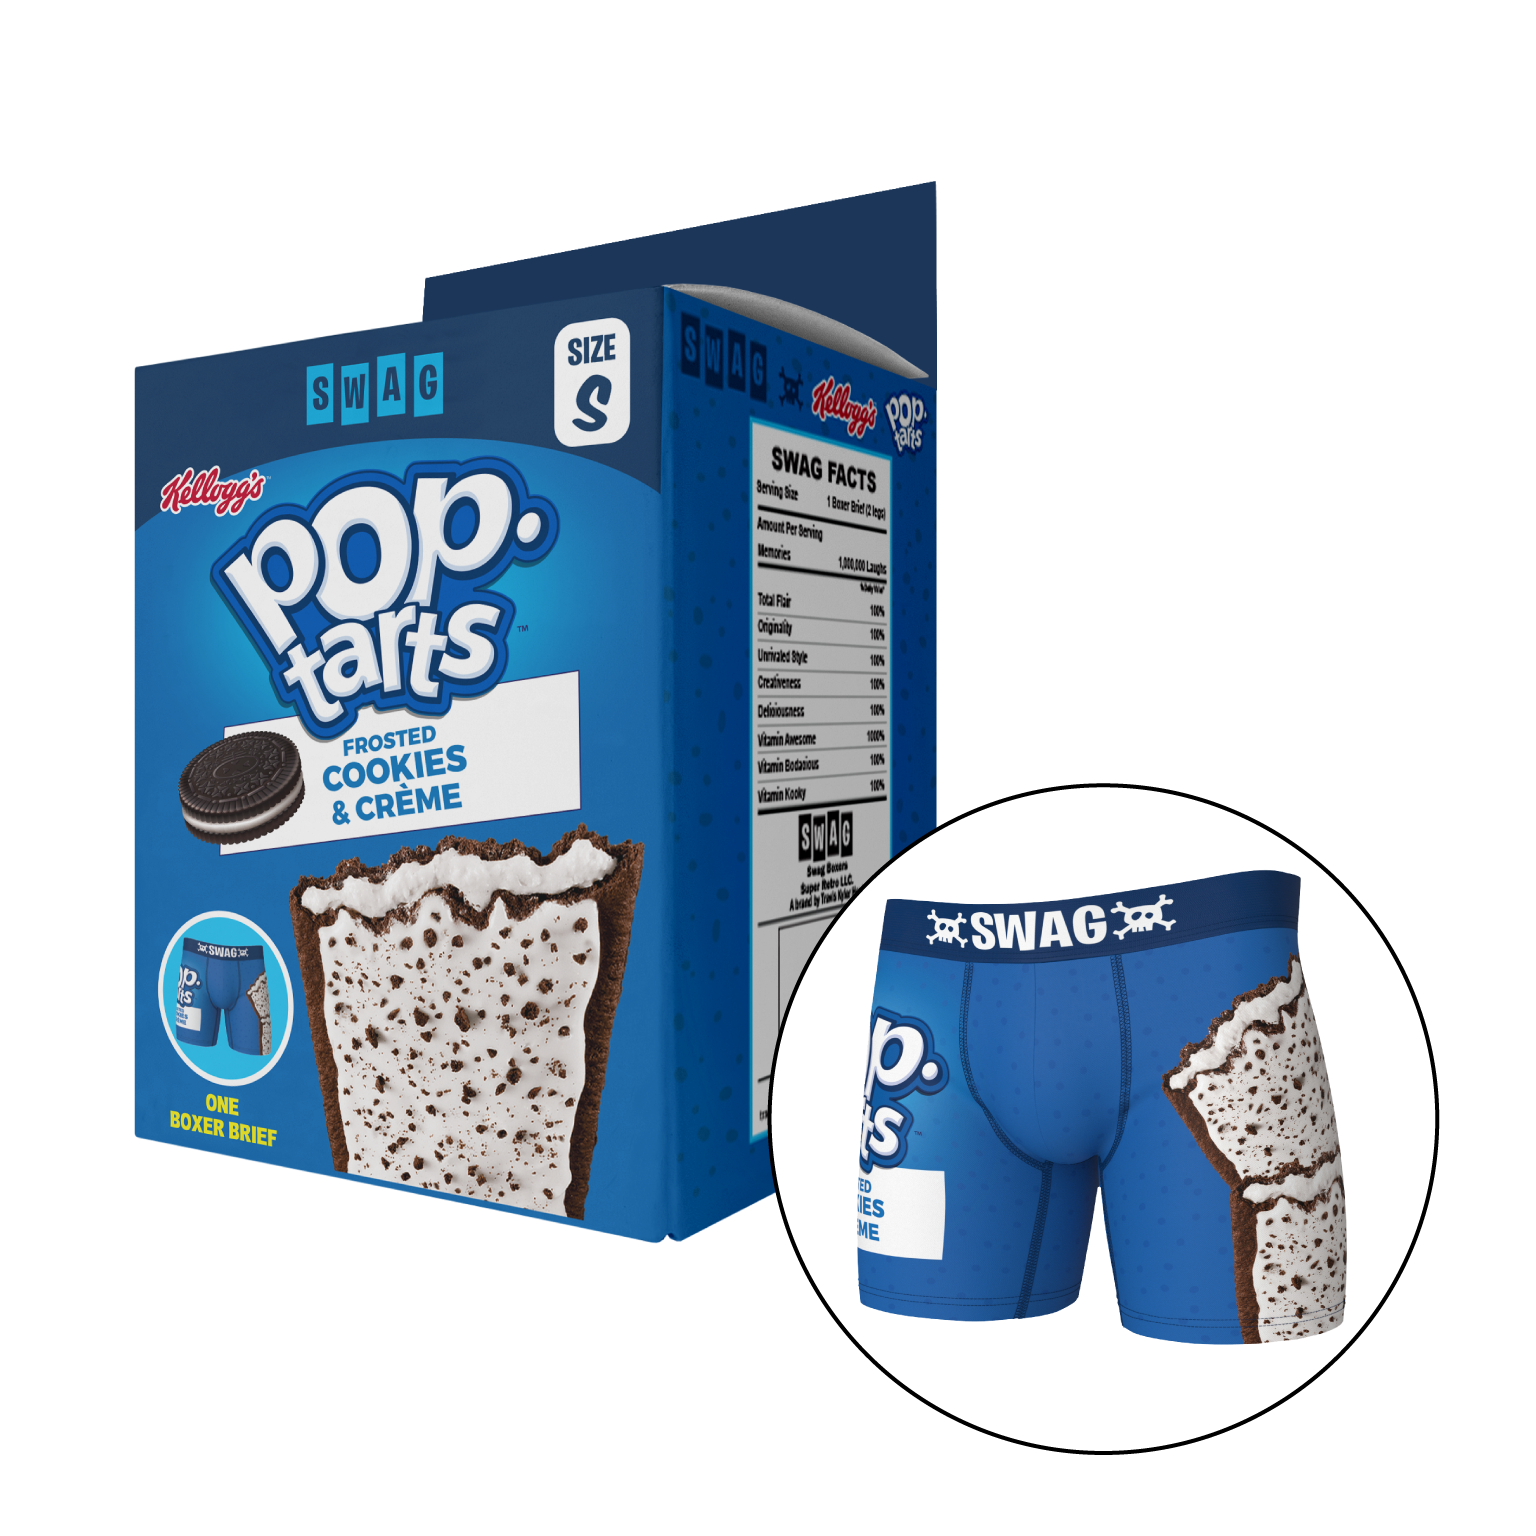 SWAG - Cereal Aisle BOXers: Cookies & Creme Pop Tarts – SWAG Boxers